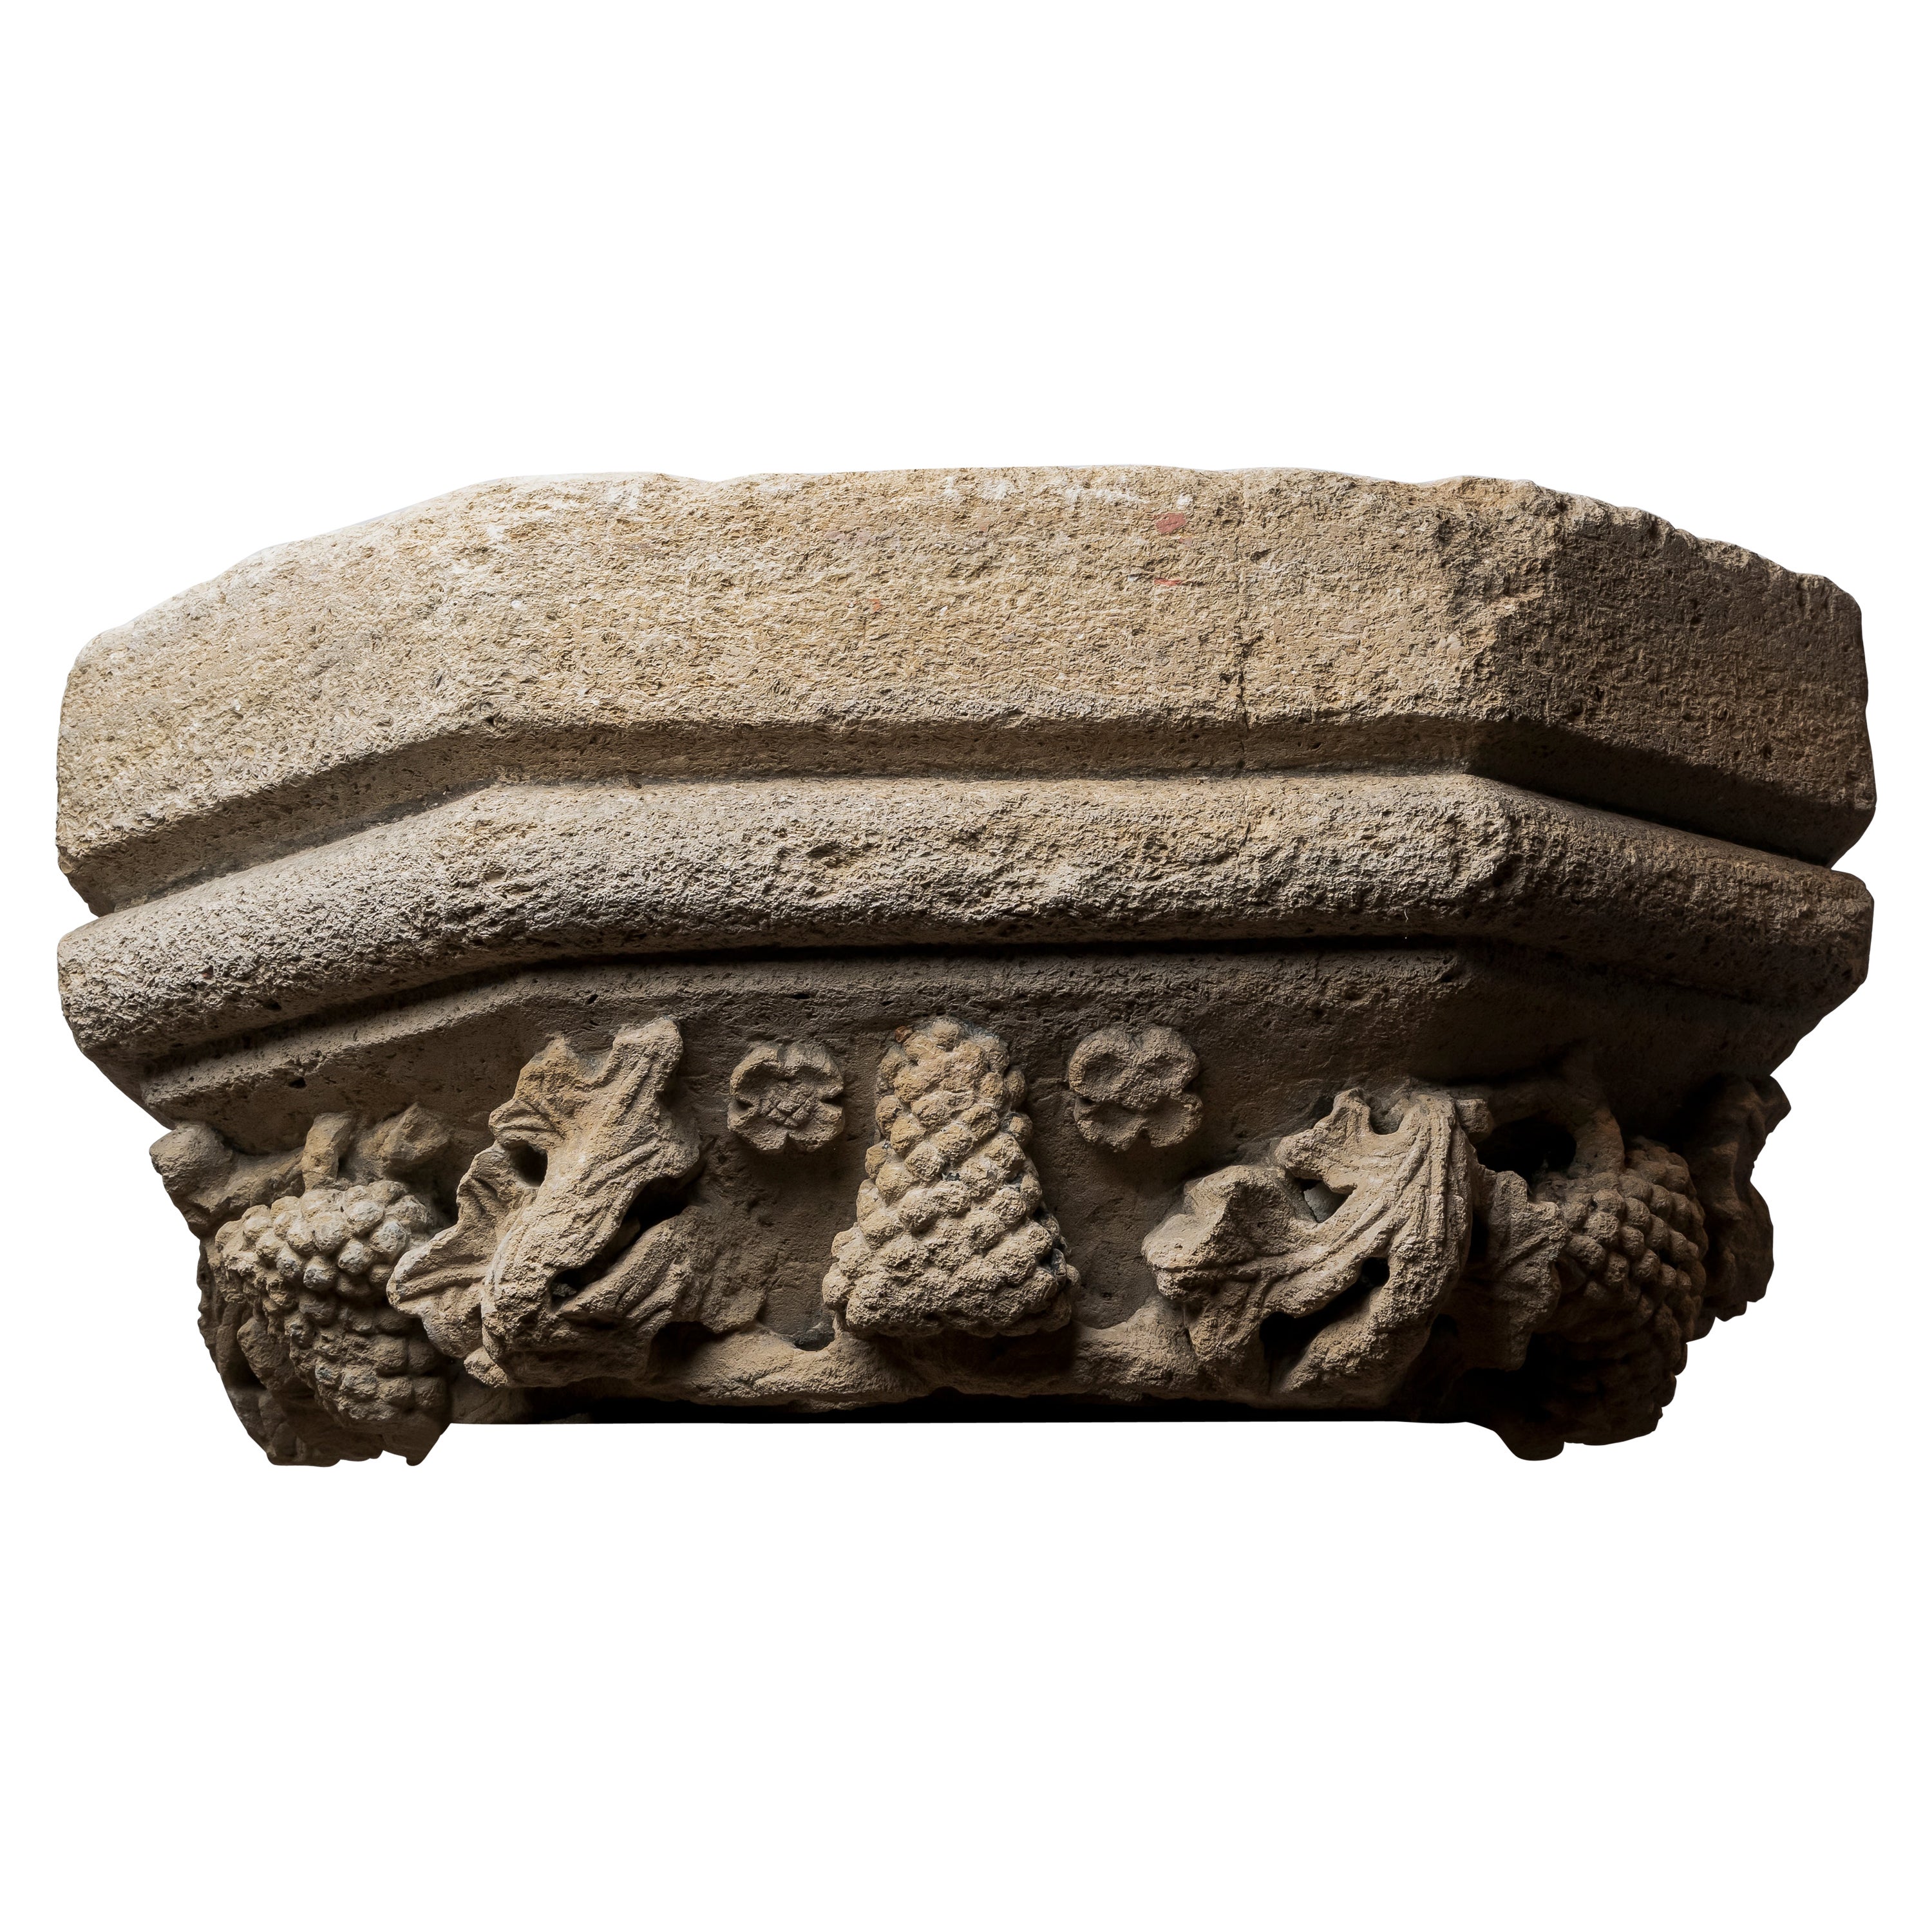 Large Hexagonale Base of Pilaster in Burgundy Stone, Burgundy, 15th Century For Sale